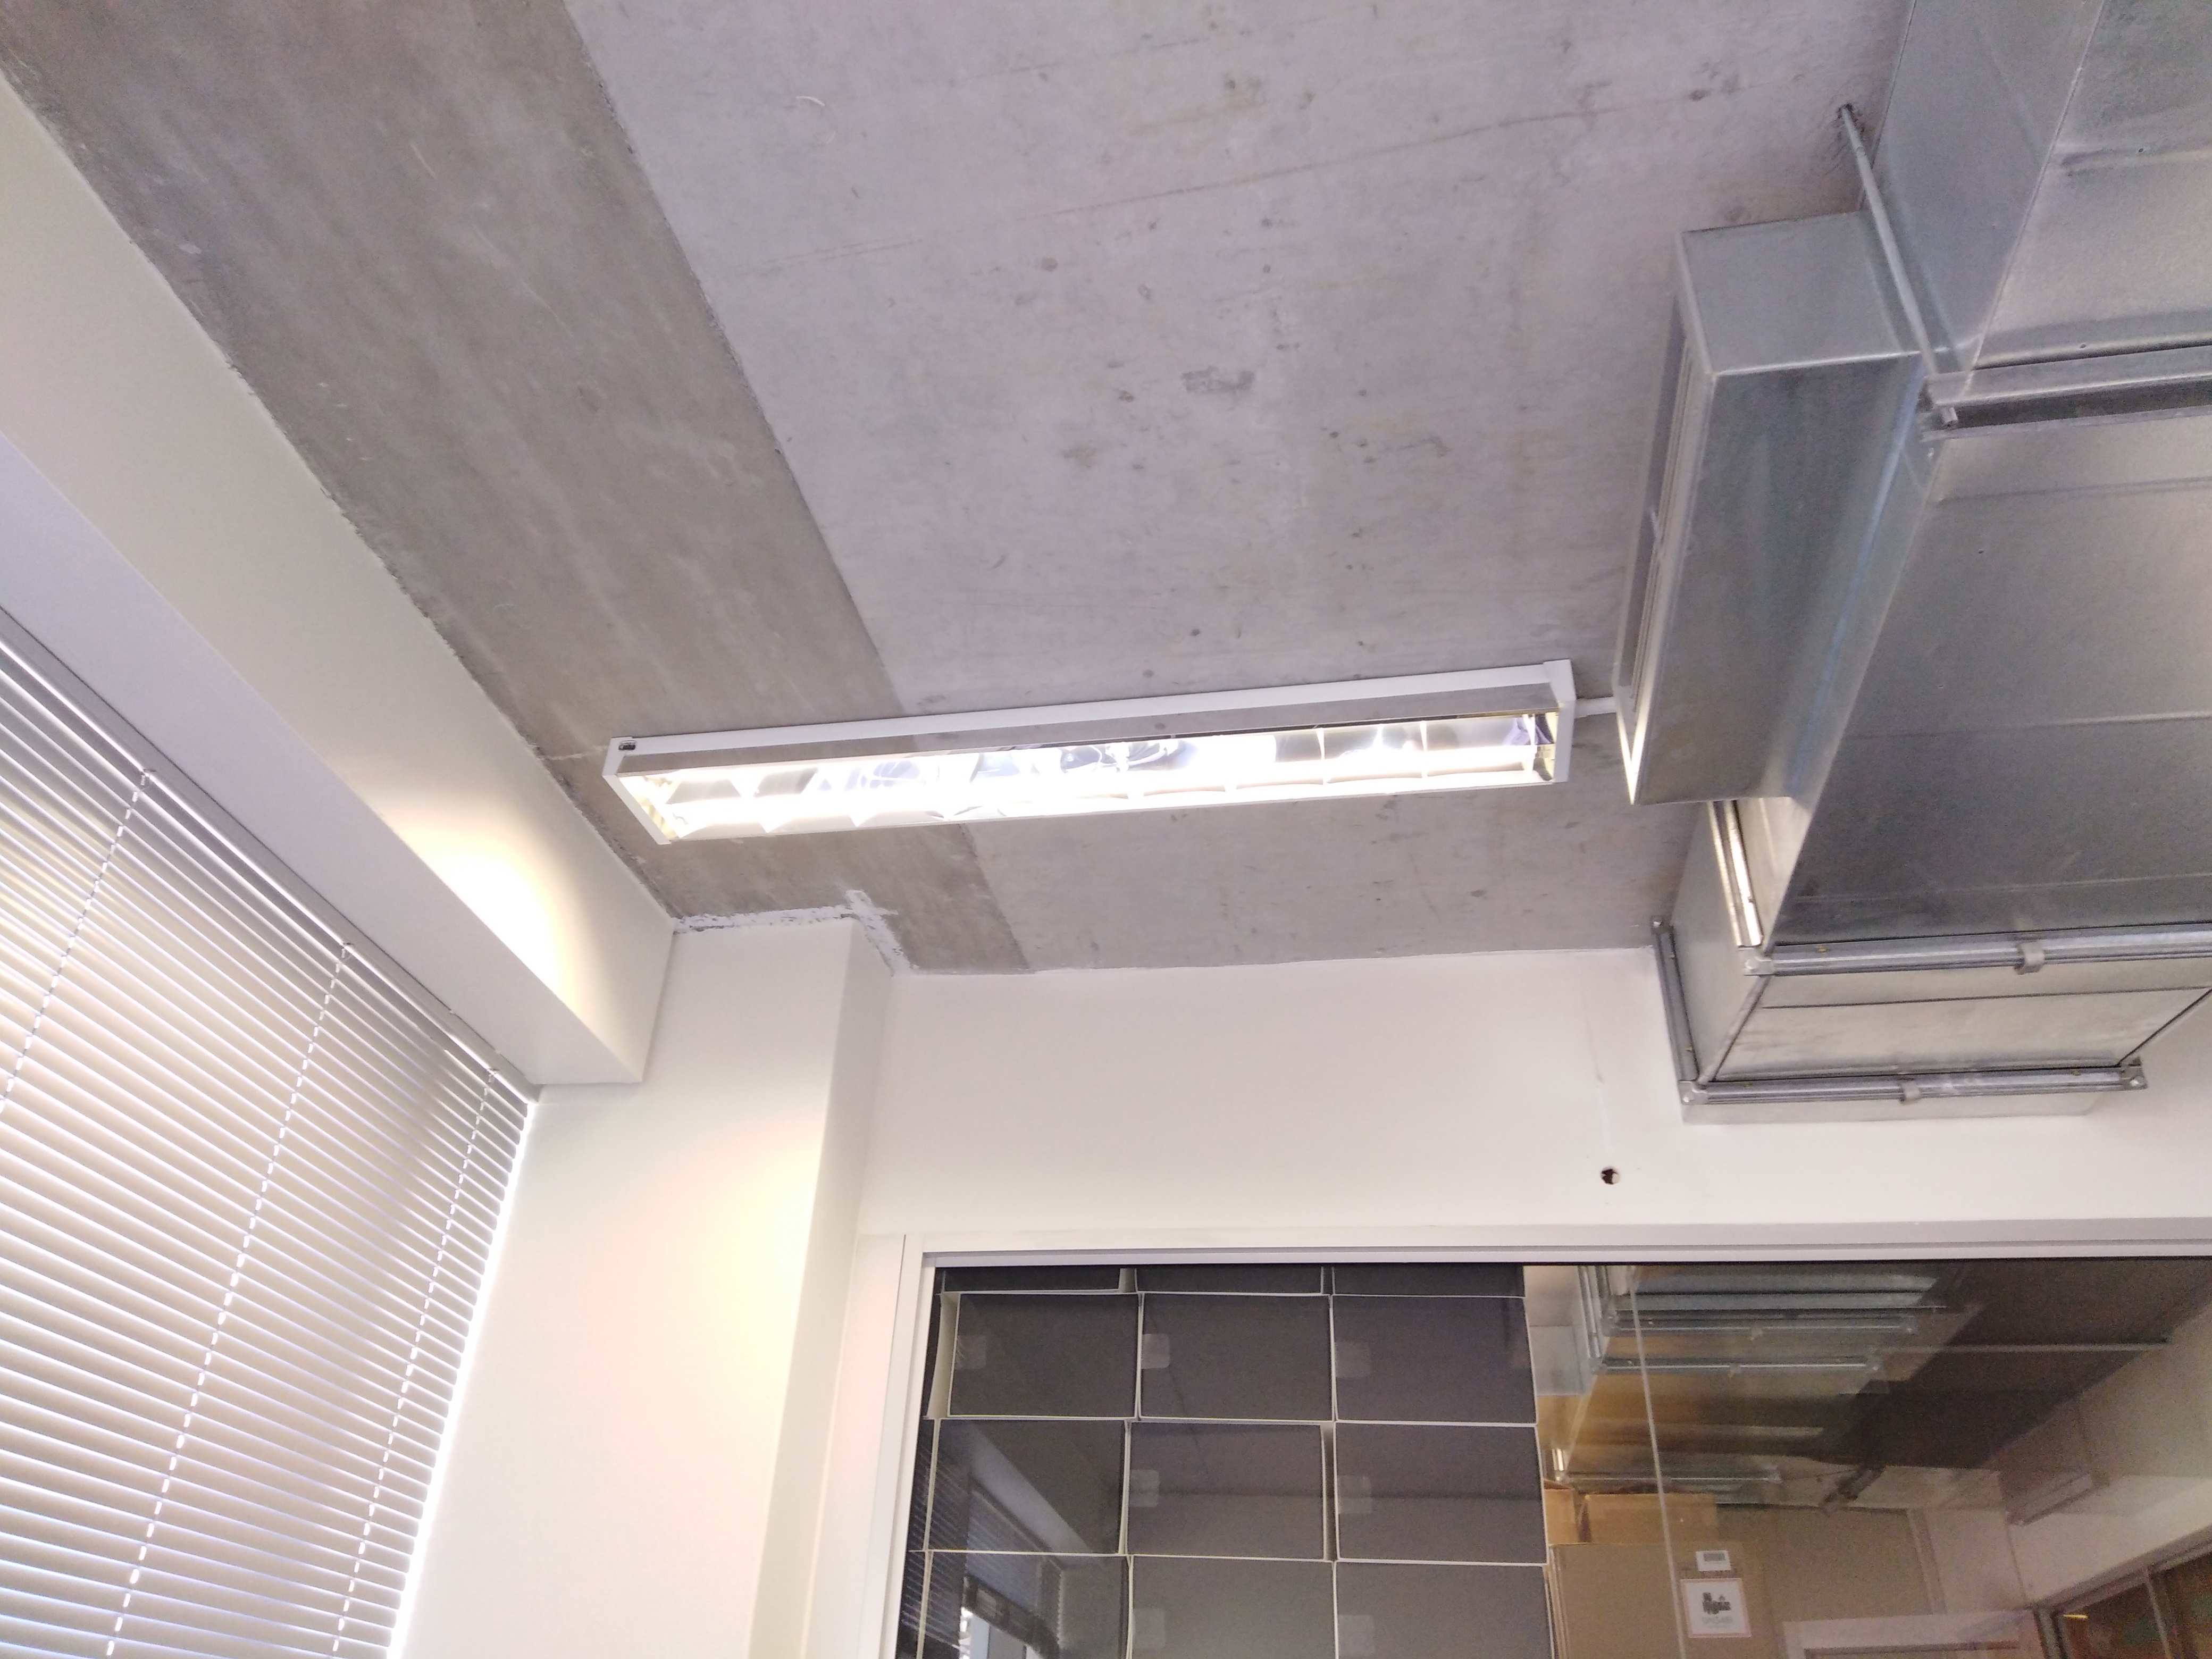 Lighting and Aircon ducting